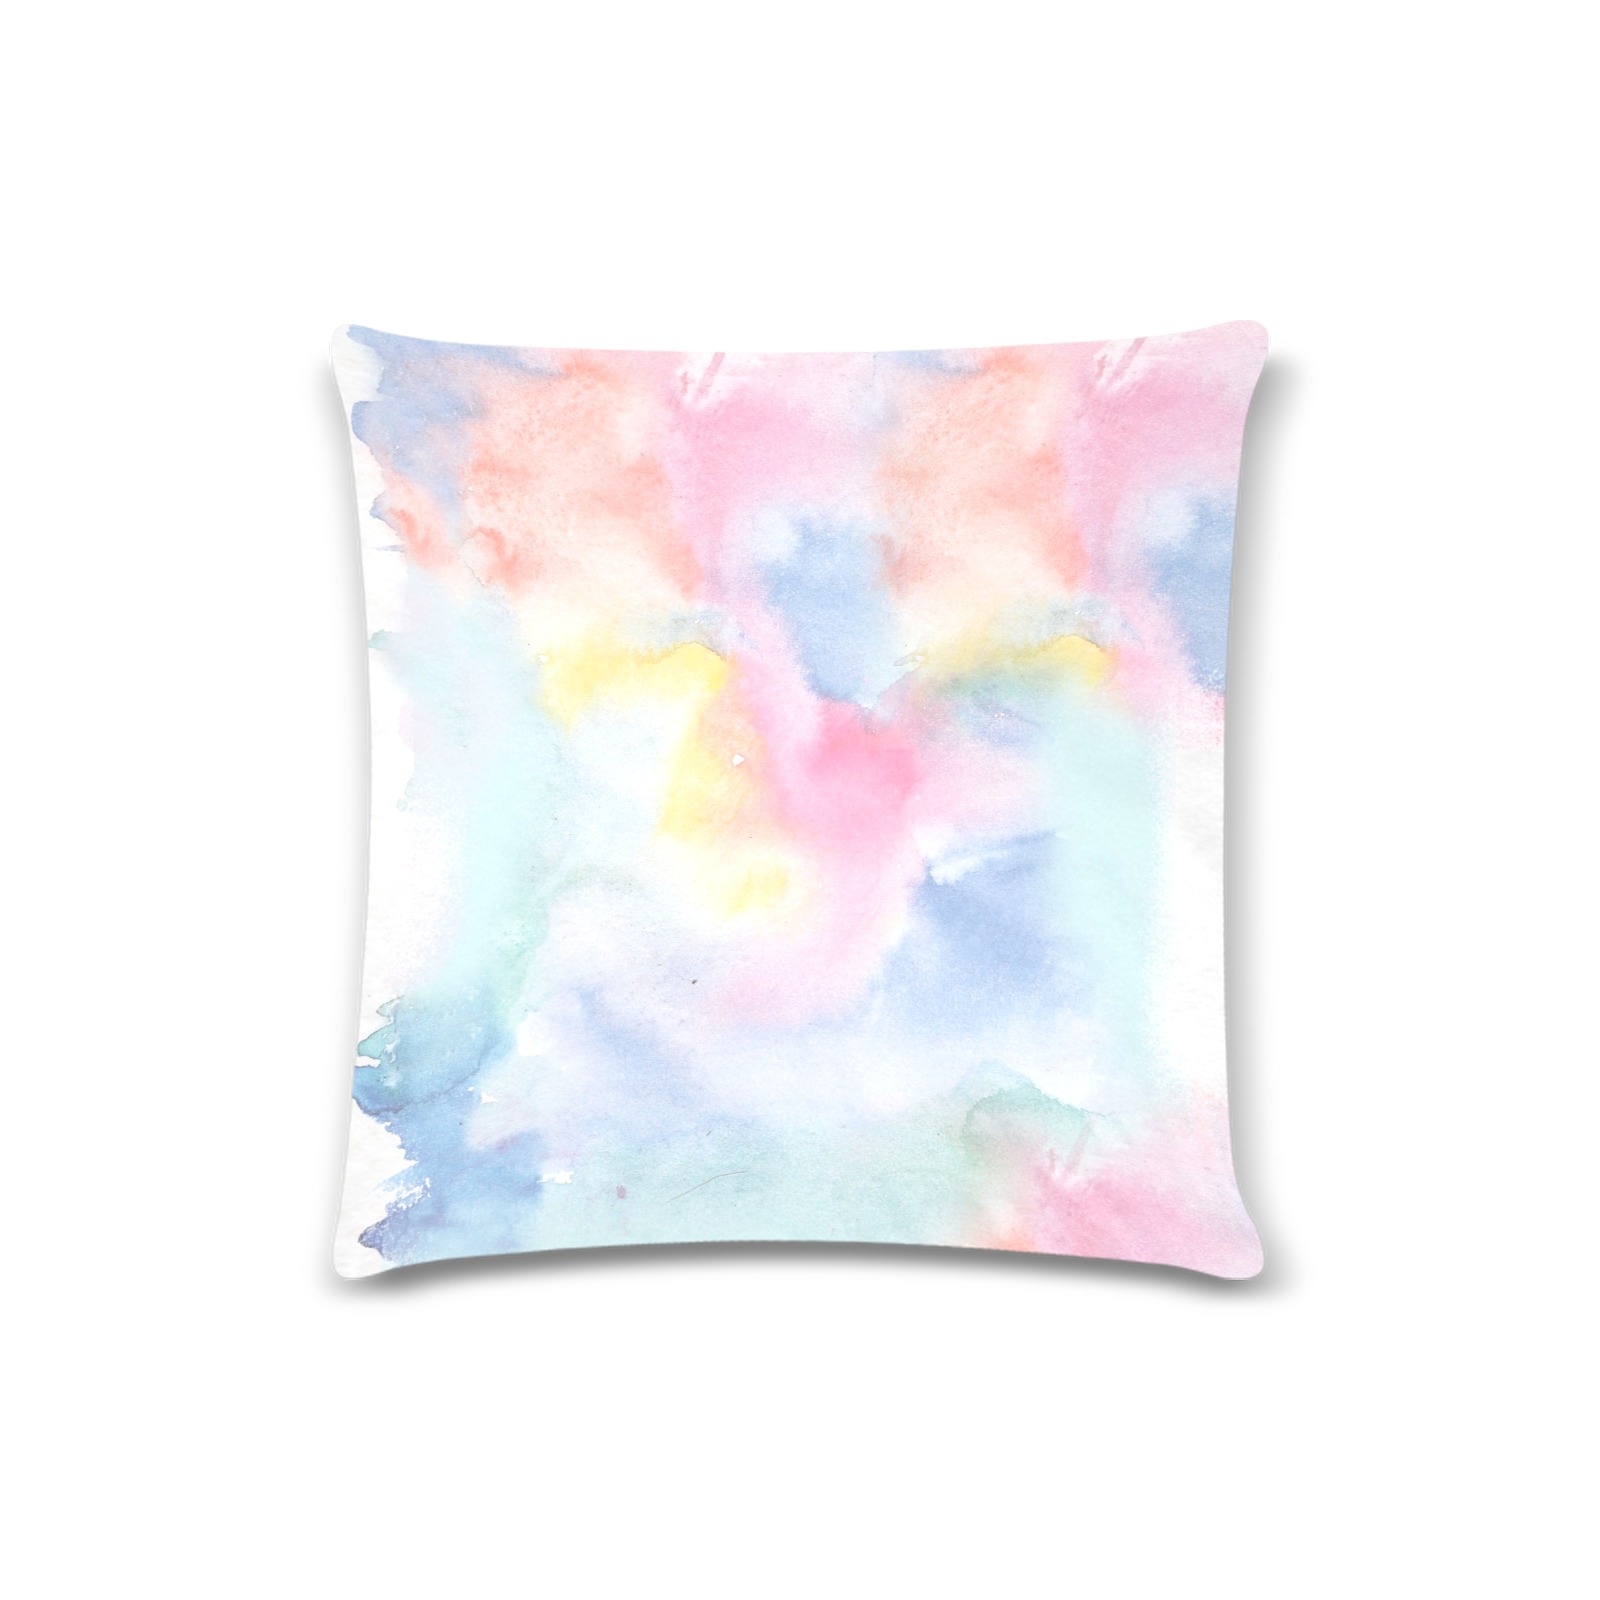 Colorful watercolor Custom Zippered Pillow Case 16"x16" (one side)